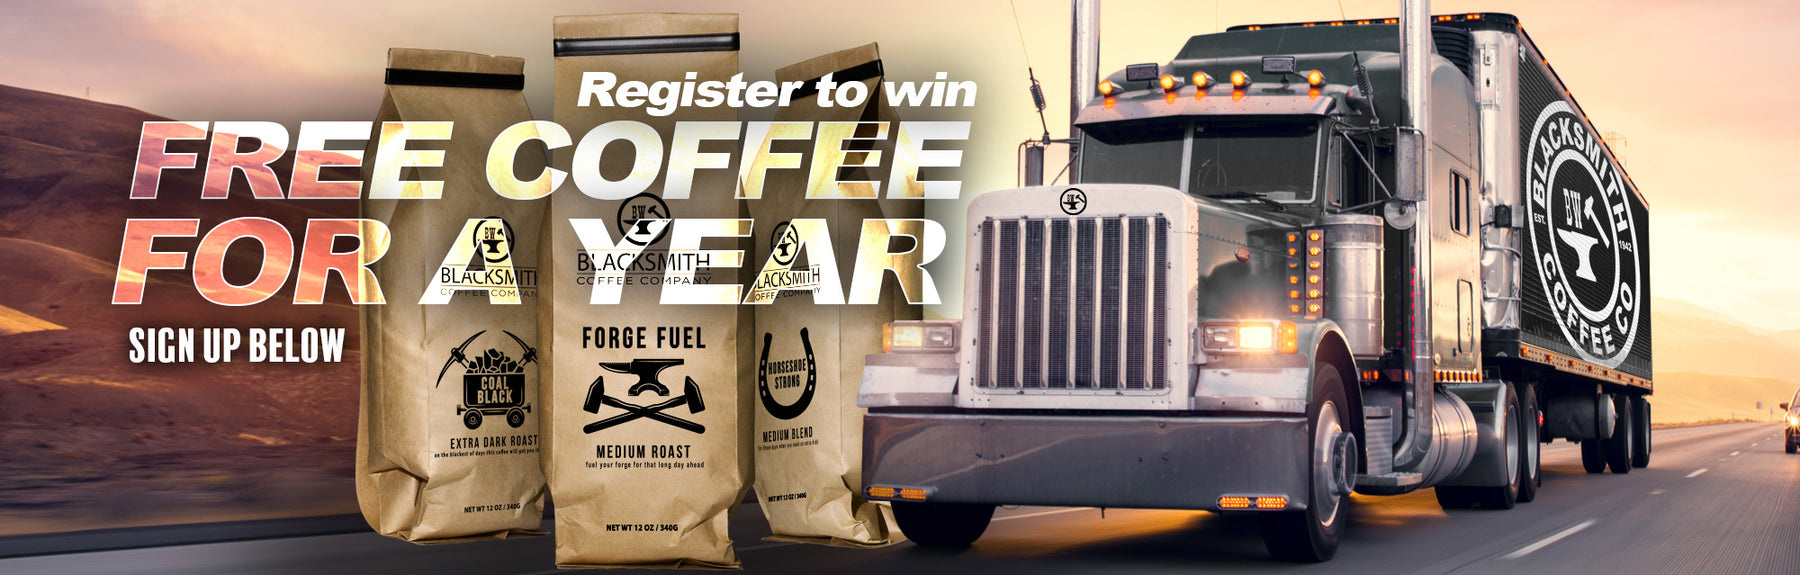 Register to win free coffee for a year